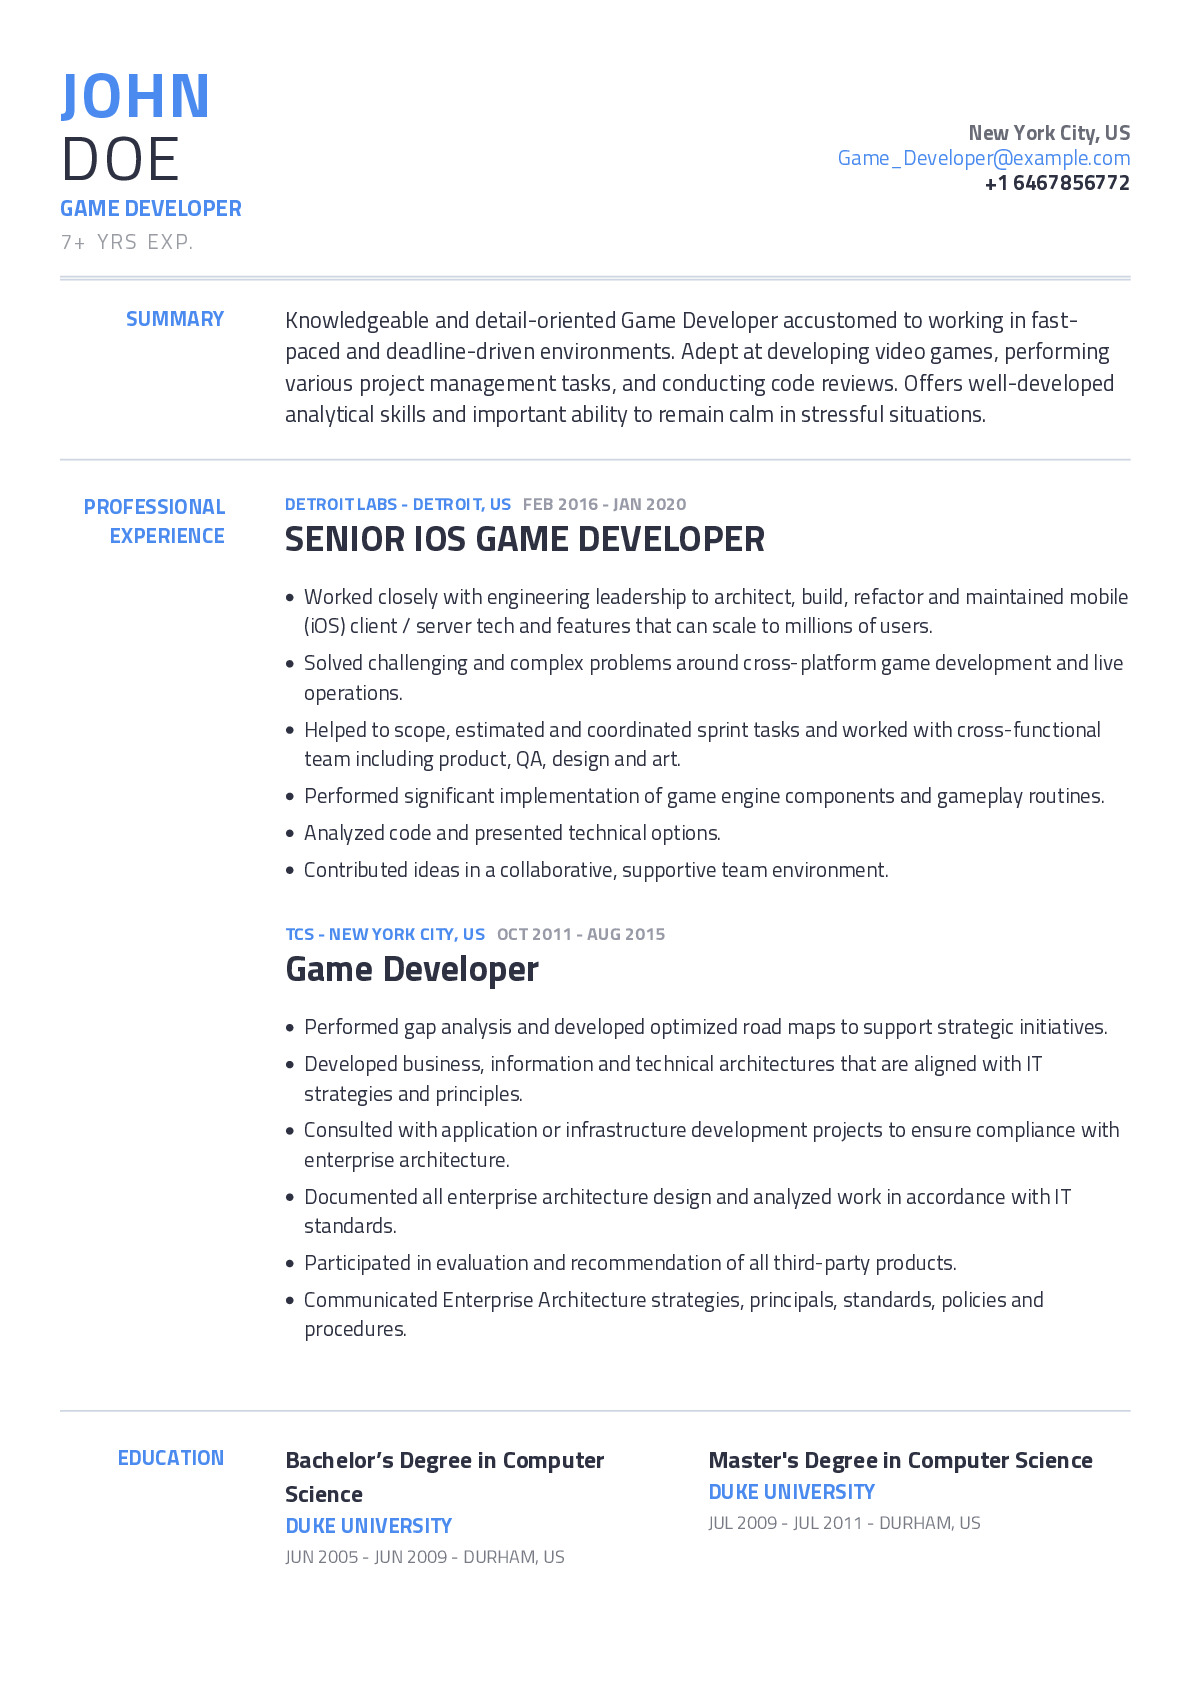 Game Testers: Key Technical Skills